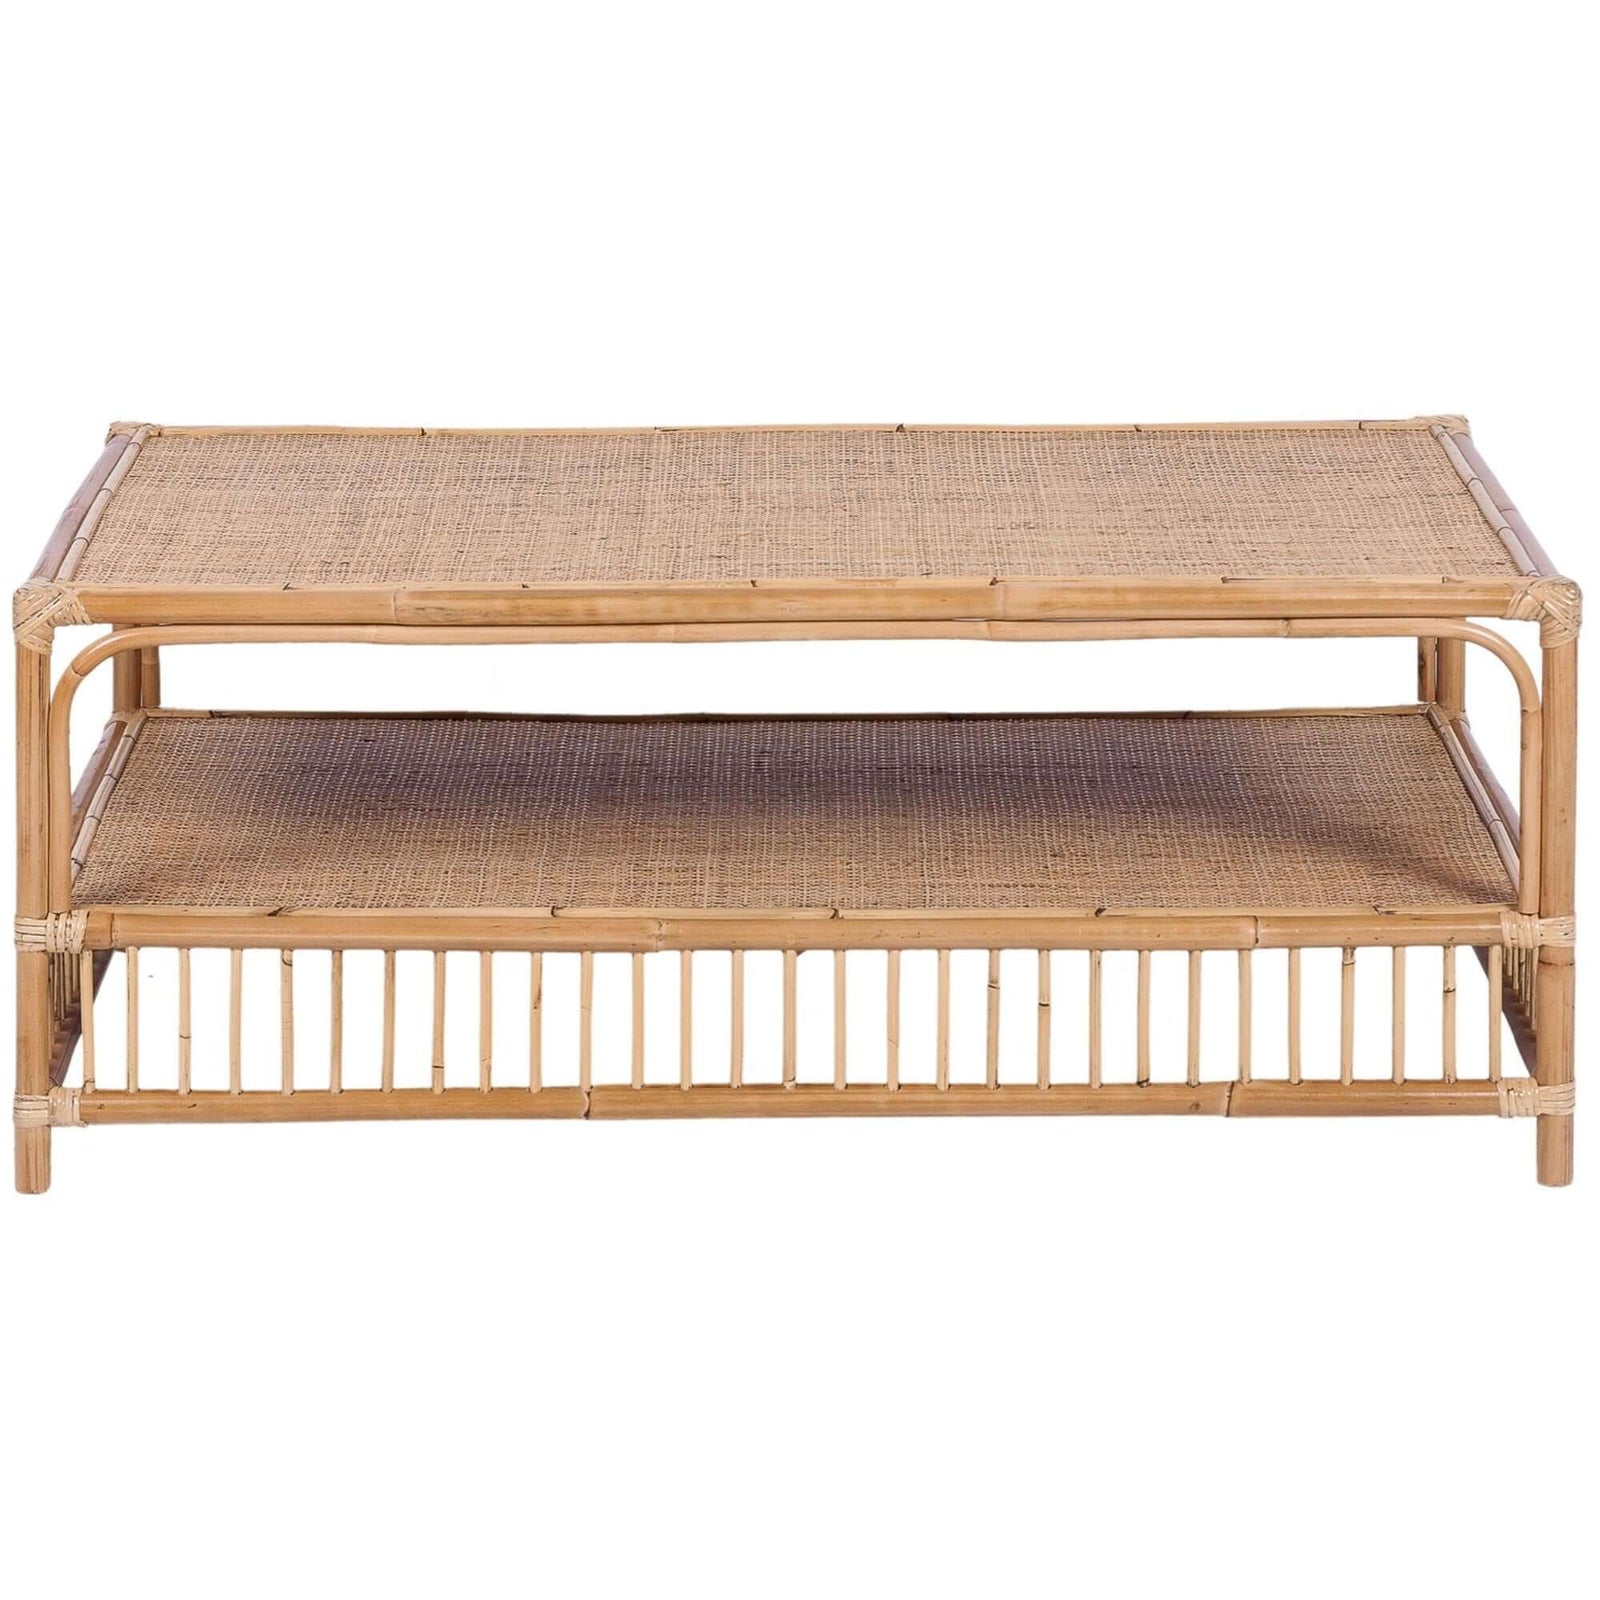 Earthy 110cm Rattan Cane Coffee Table - Natural-Upinteriors